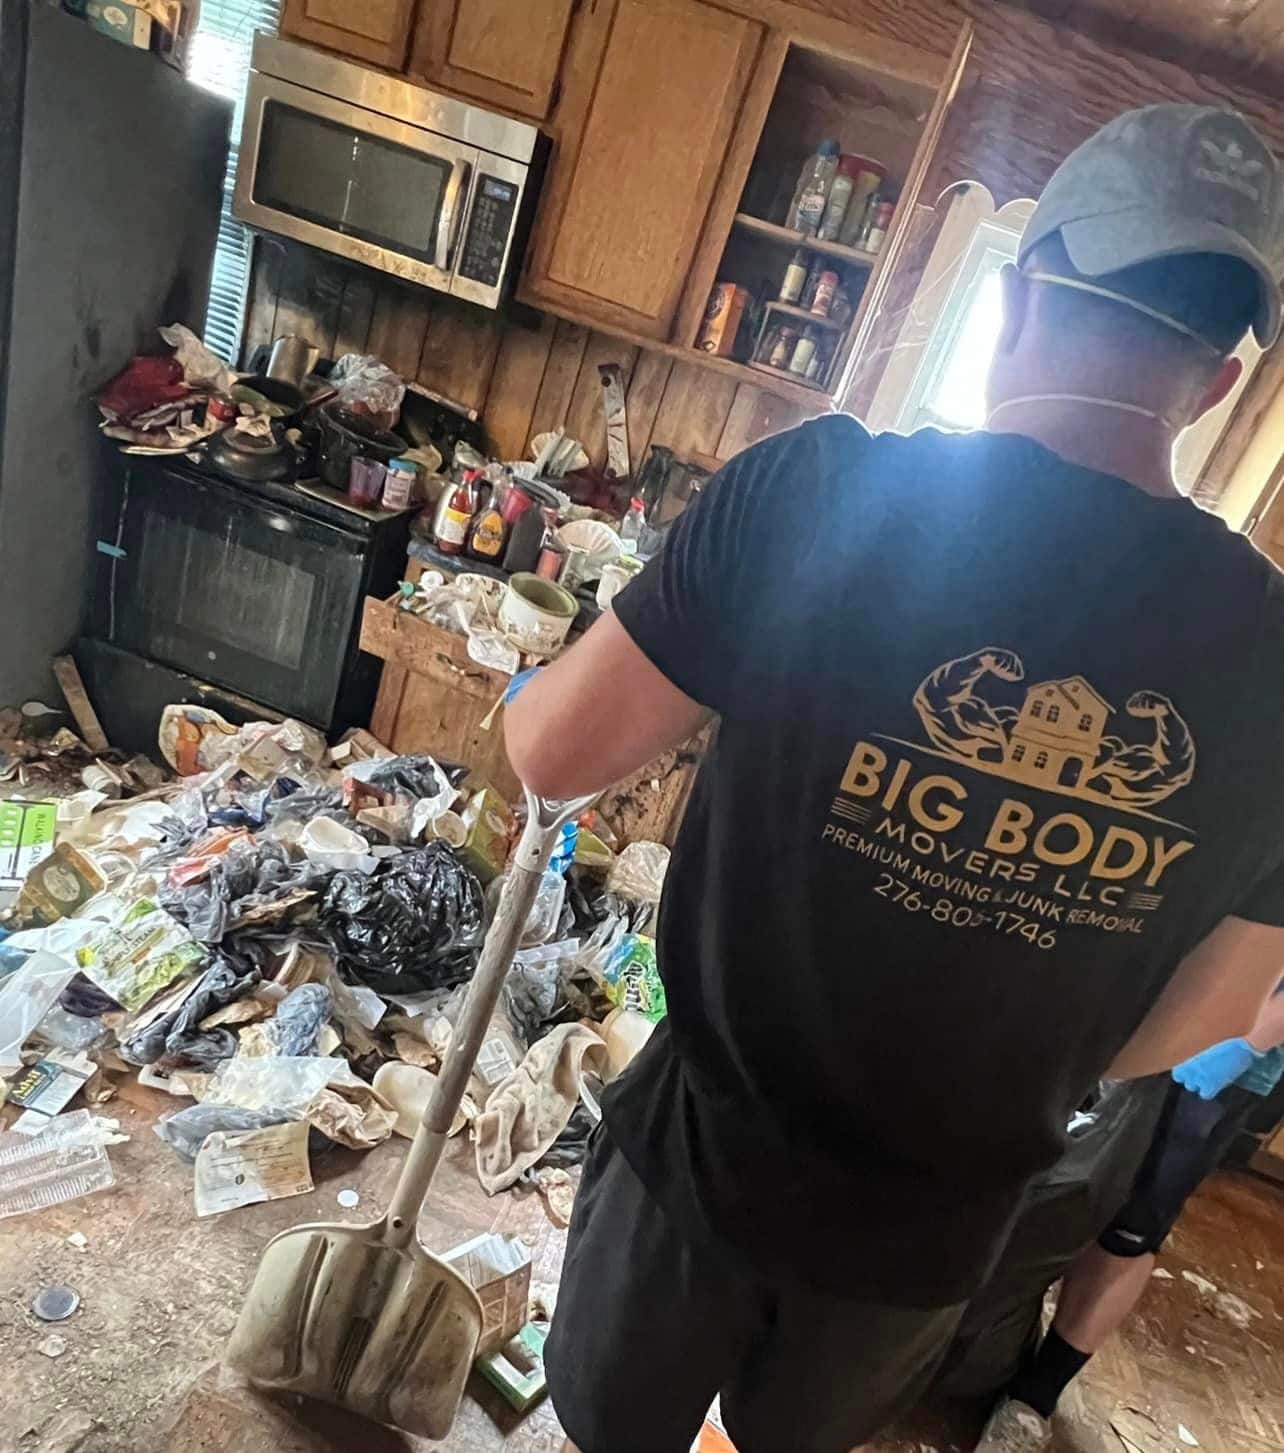 Employee of Big Body Movers doing hoarding cleanouts for customer.